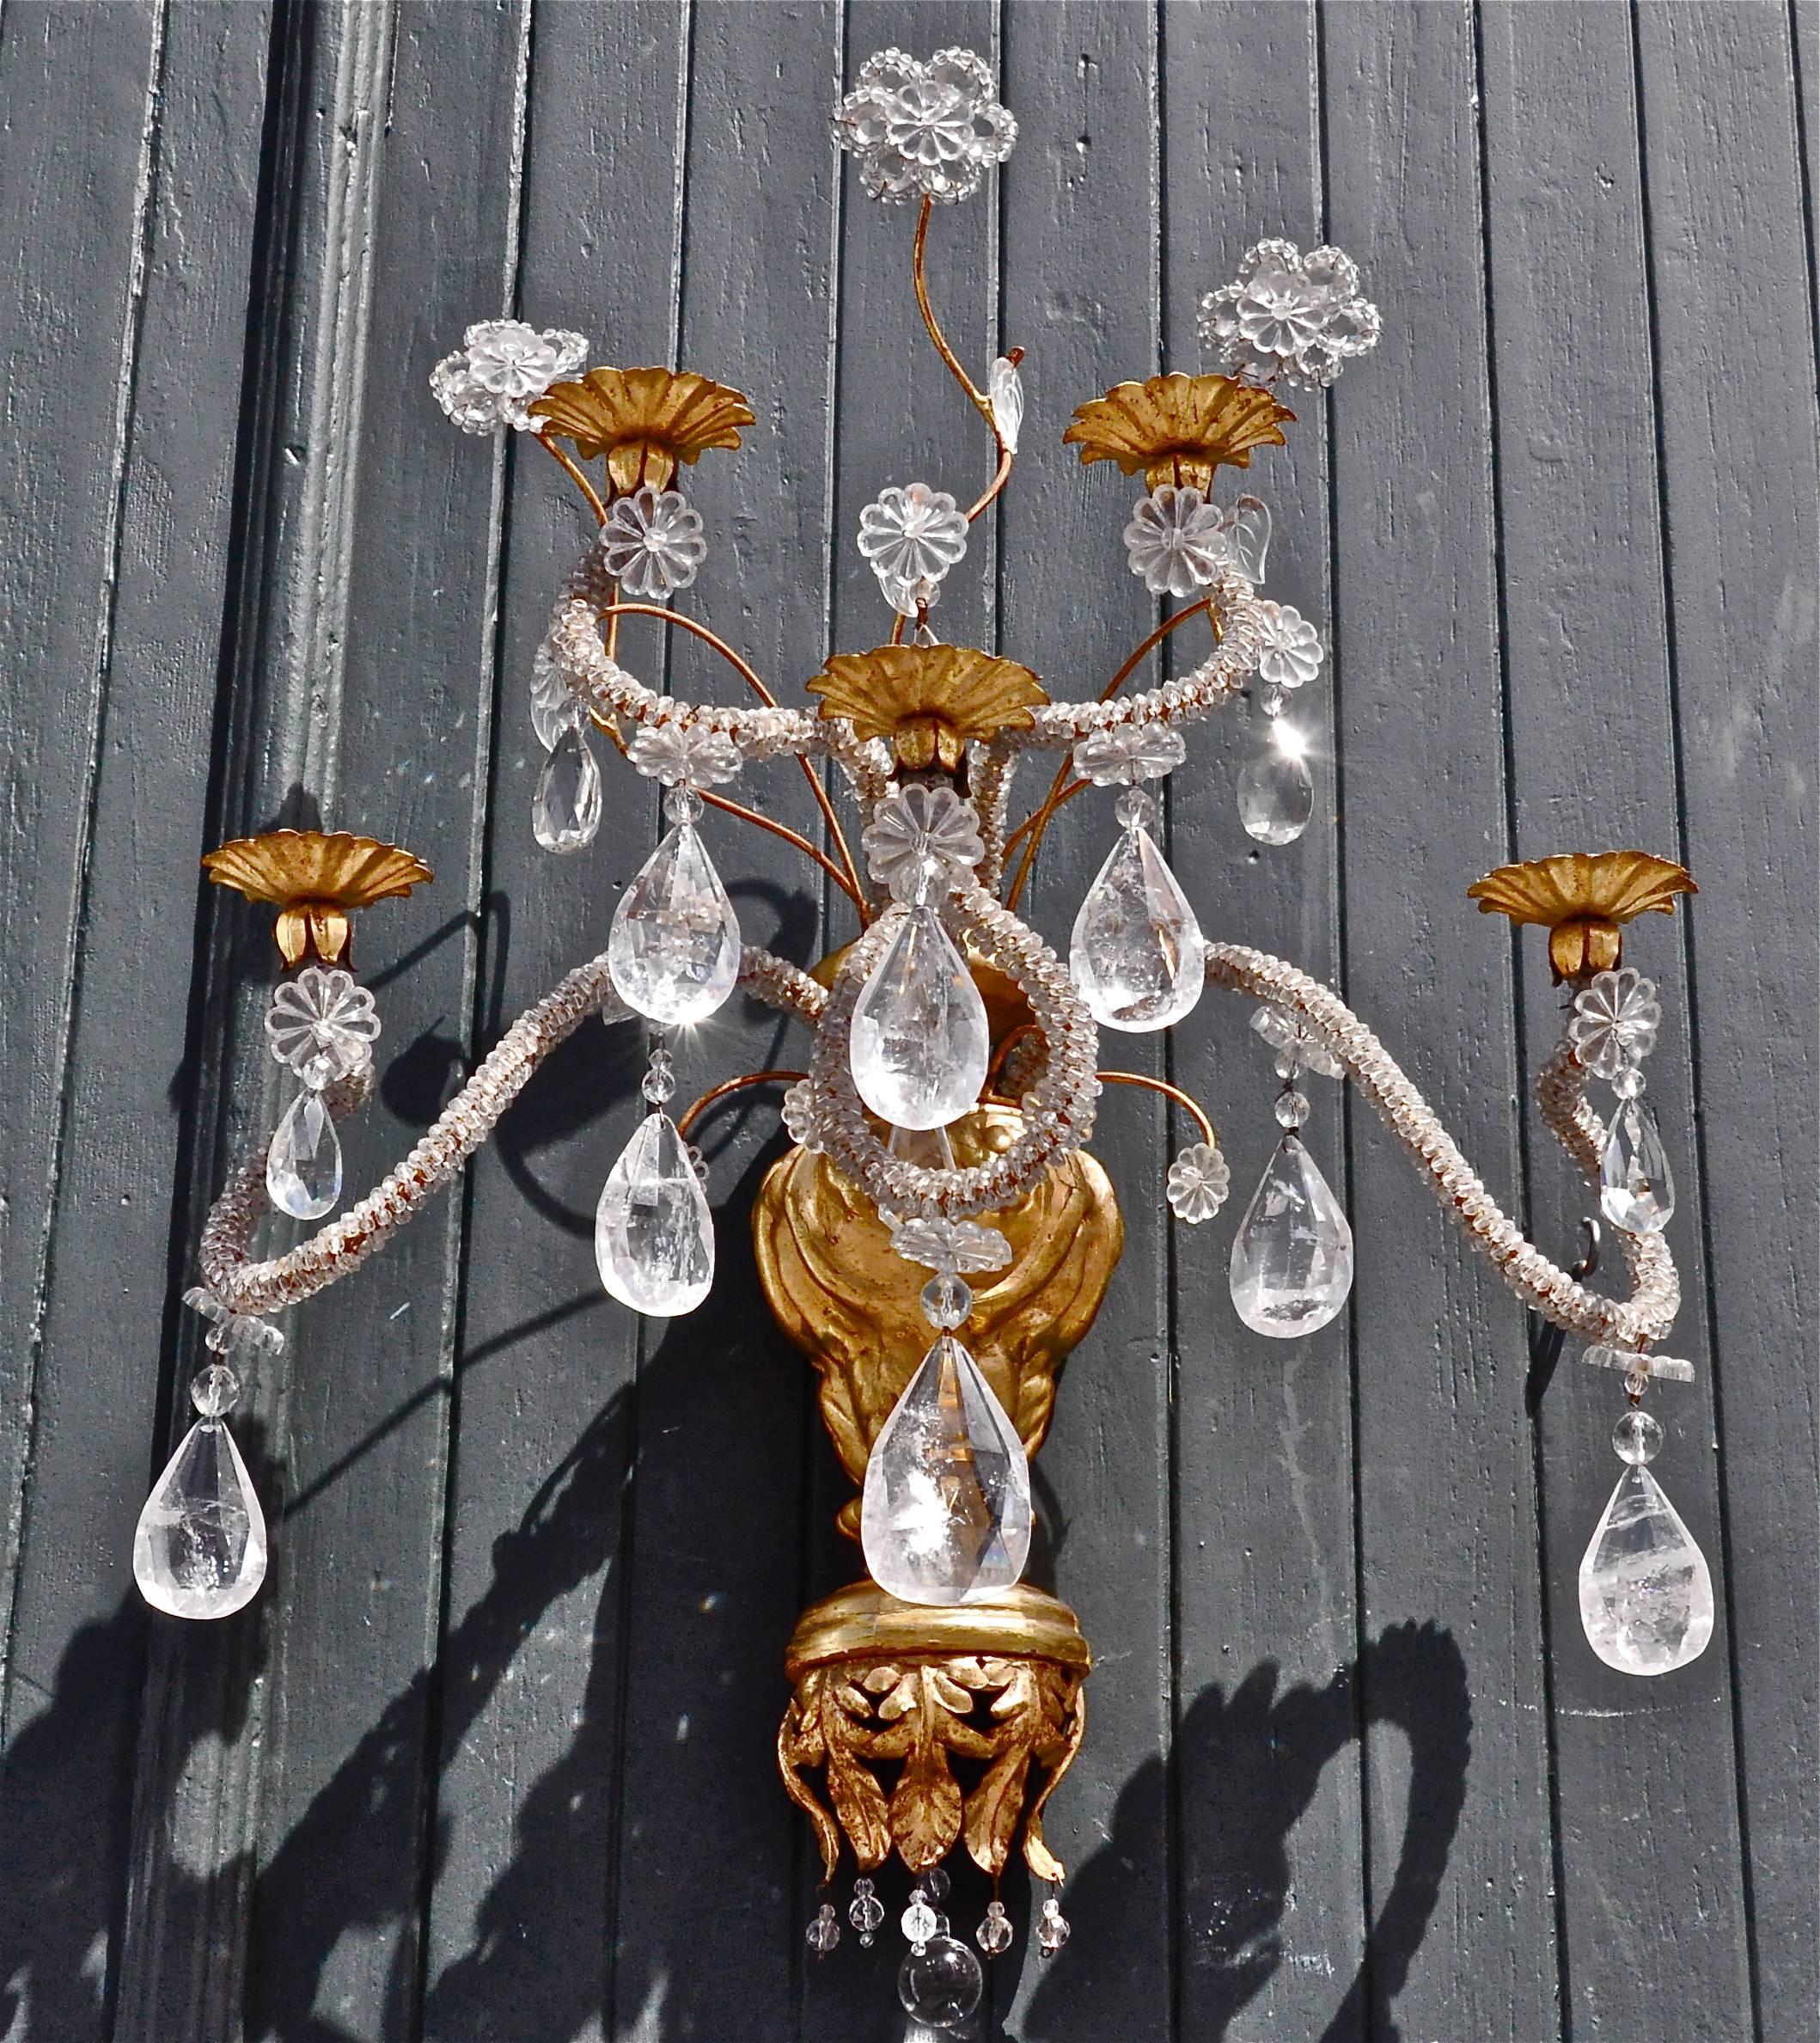 Pair of giltwood and Iron Italian rock crystal sconces.

All original gilding.
Carved wood and iron.
Stylistically similar to 